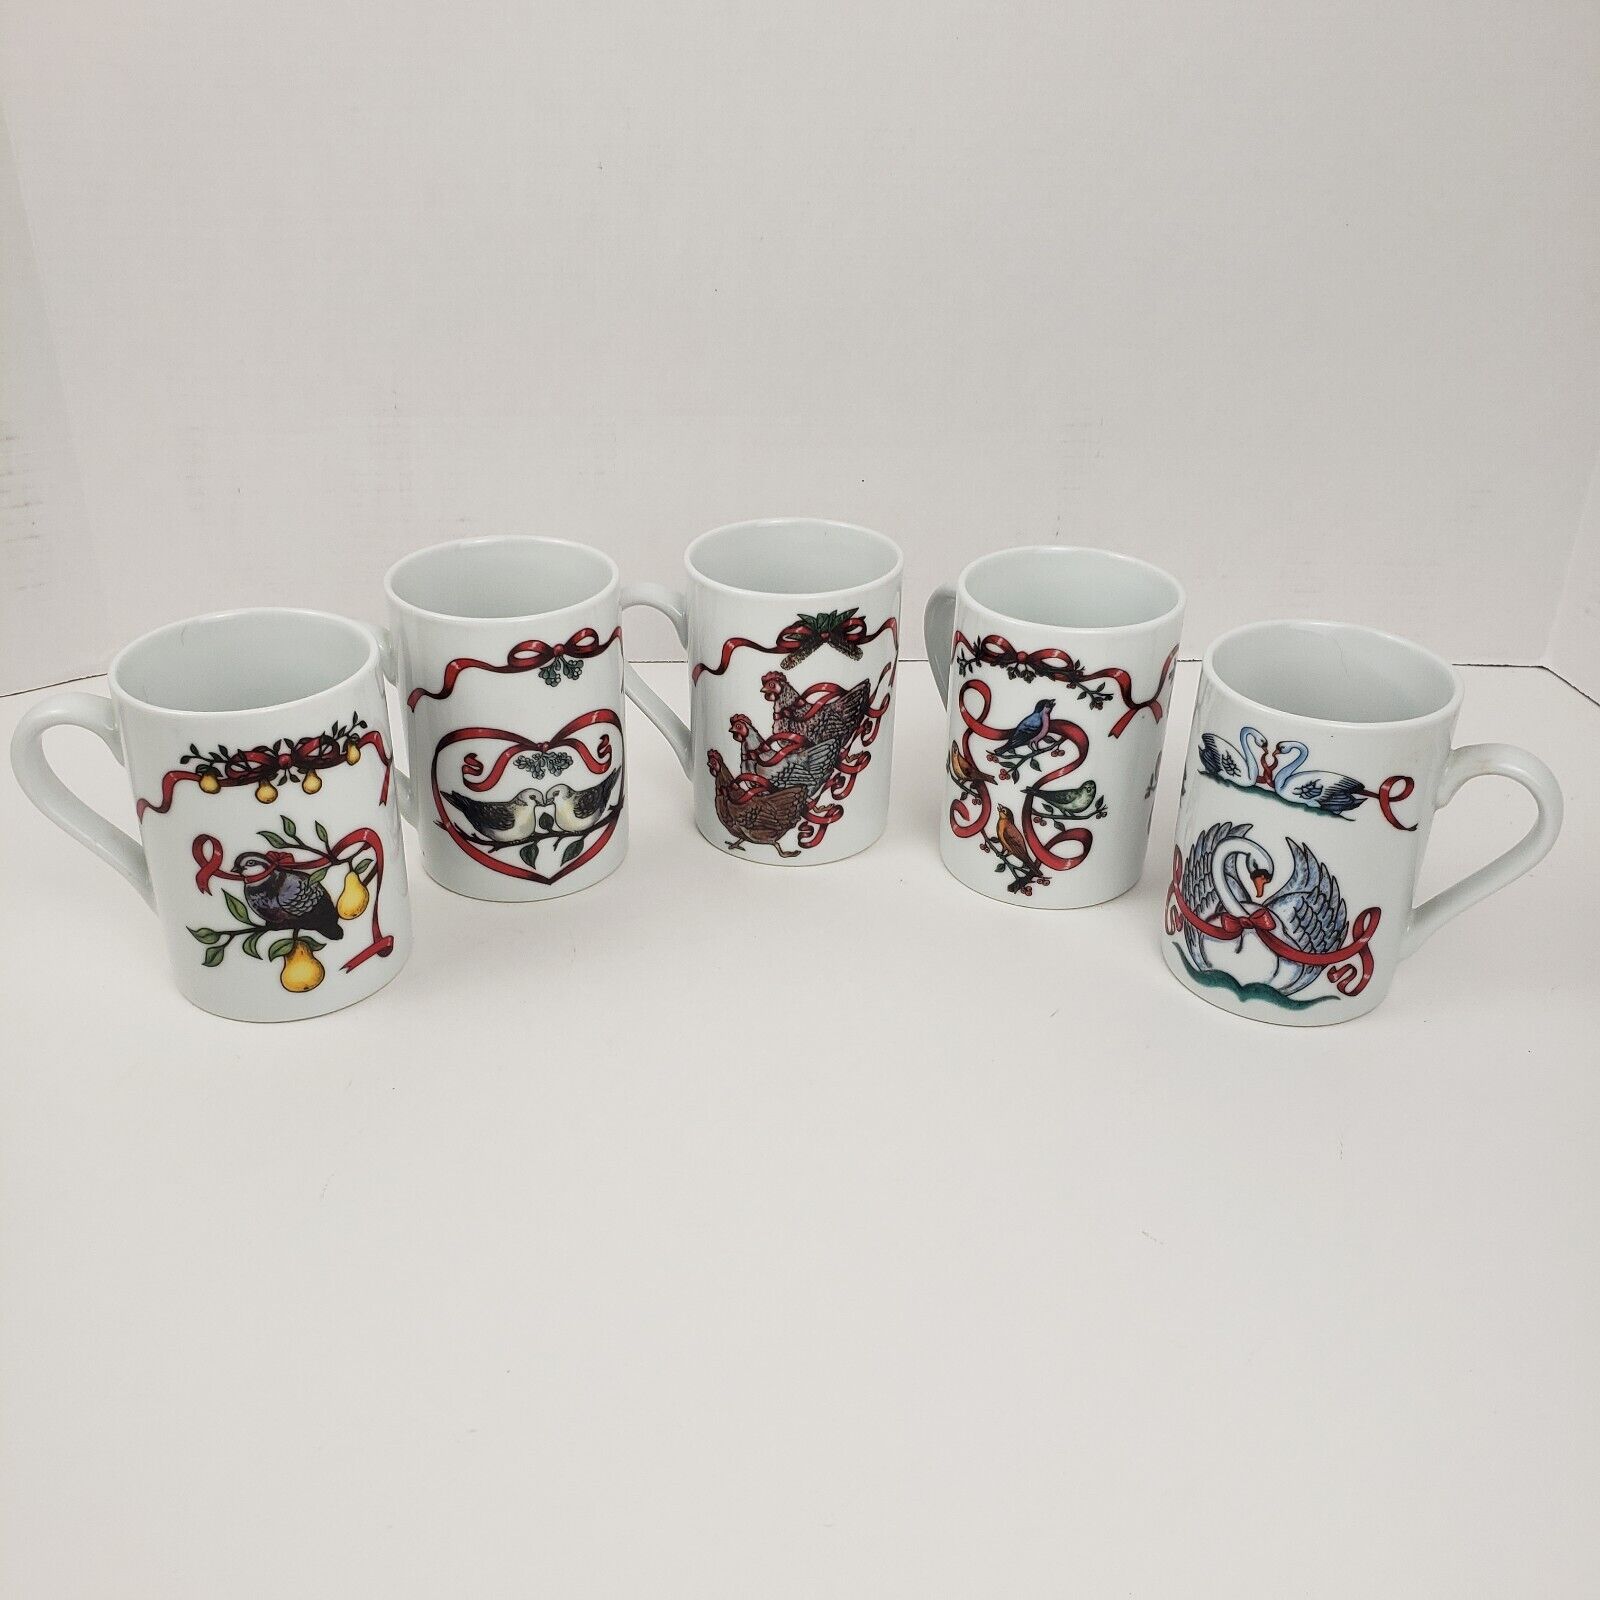 12 DAYS OF CHRISTMAS Home For The Holidays Mugs Set of 5 - 1,2,3,4 & 7 Cups